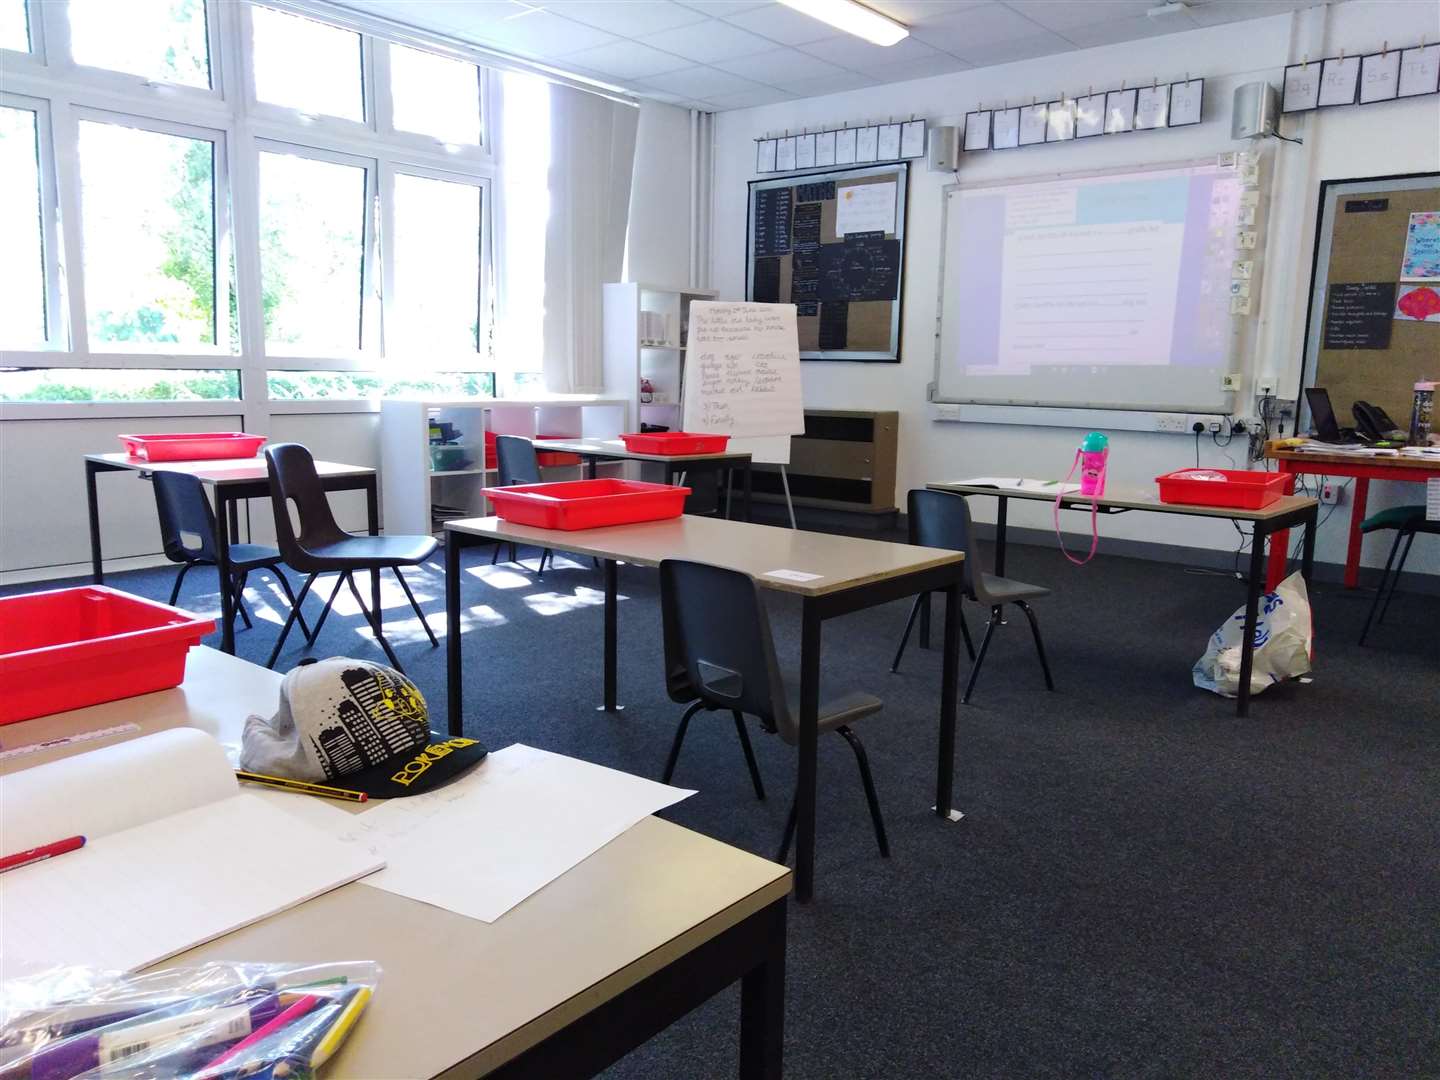 There are now 10 tables in each classroom, and one pupil sits at each